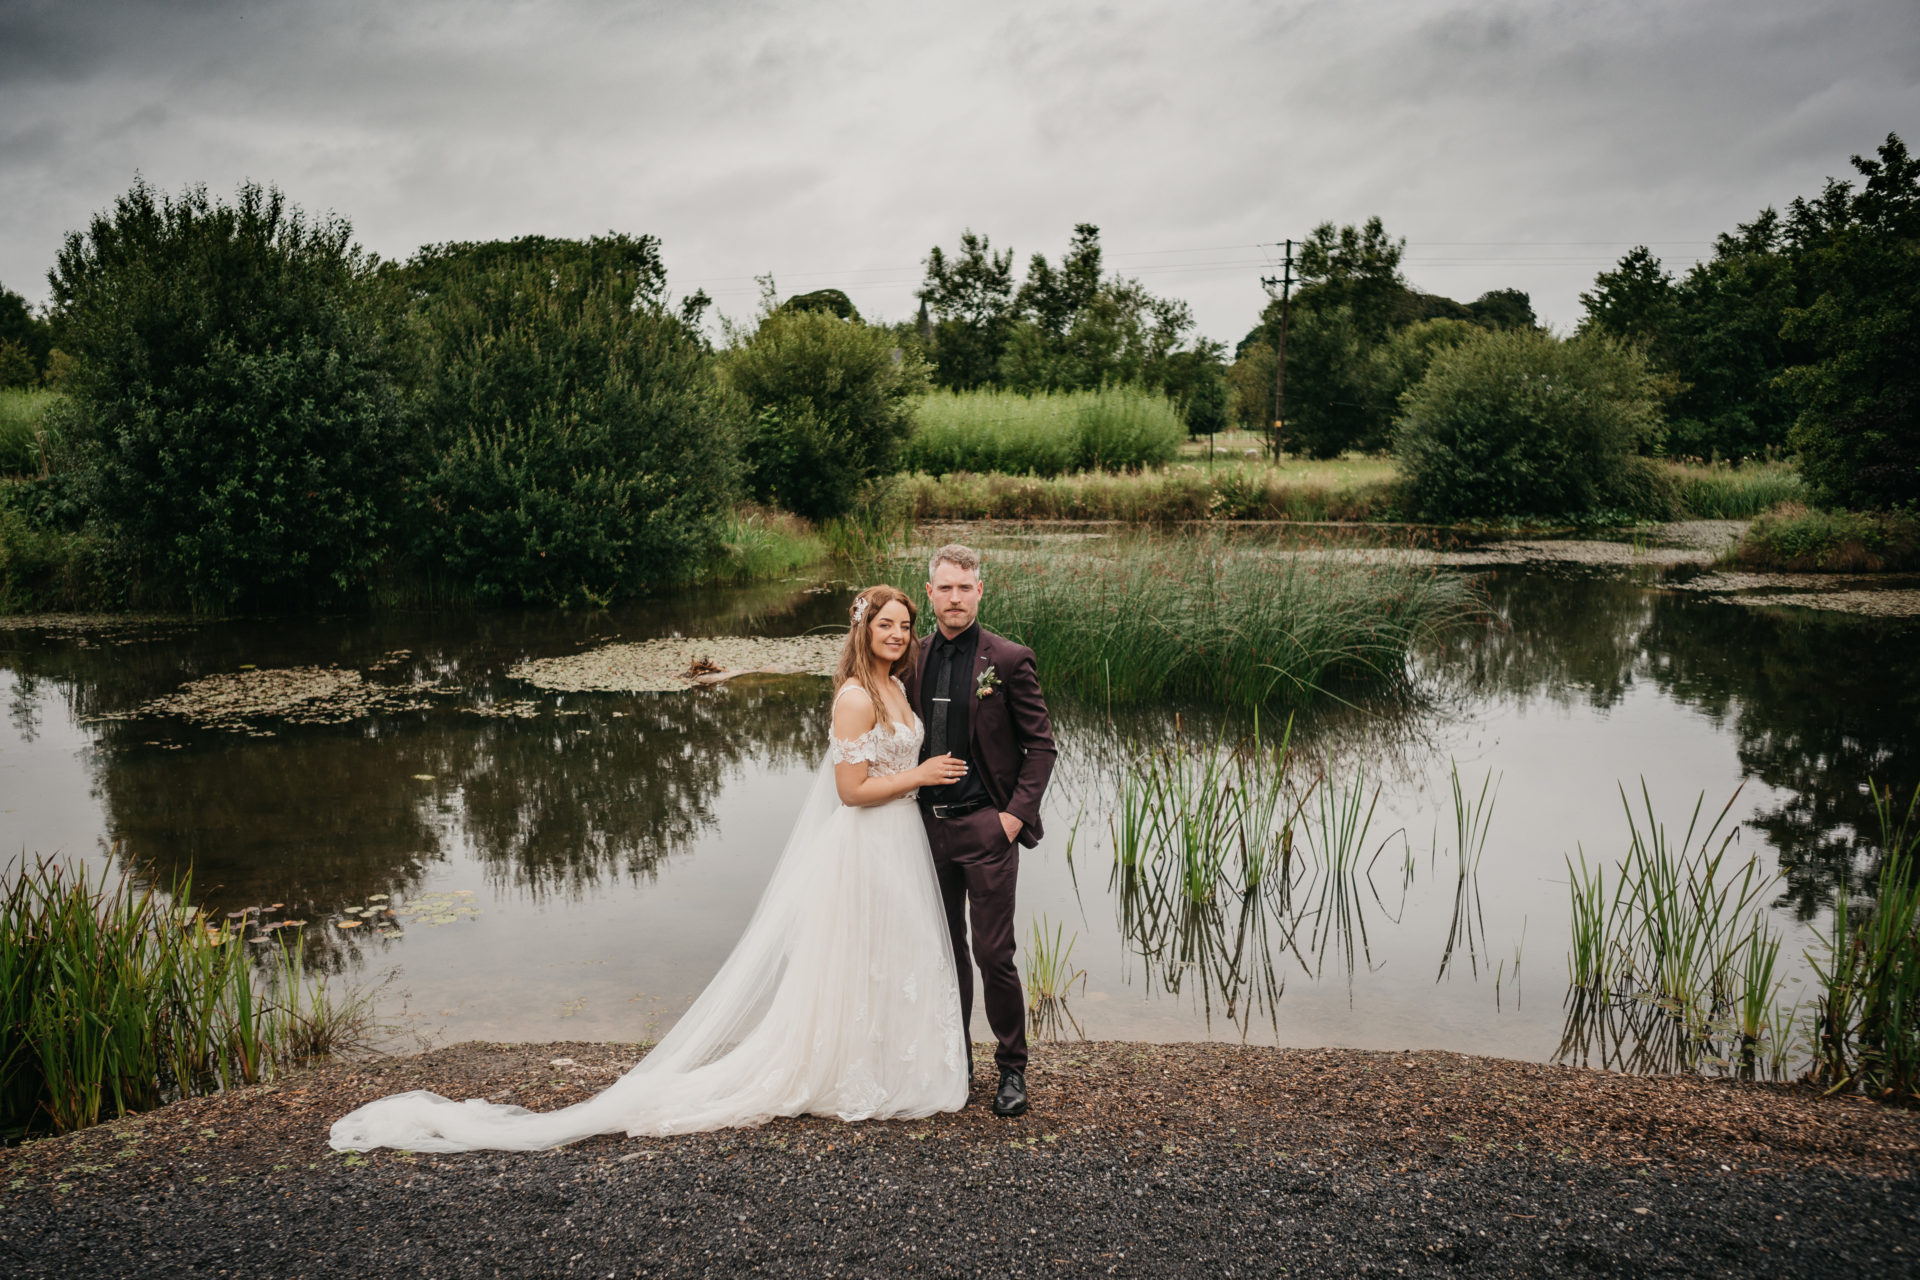 Shane Hunter and Briona Reynolds on their wedding day. Image: Moat Hill Photography